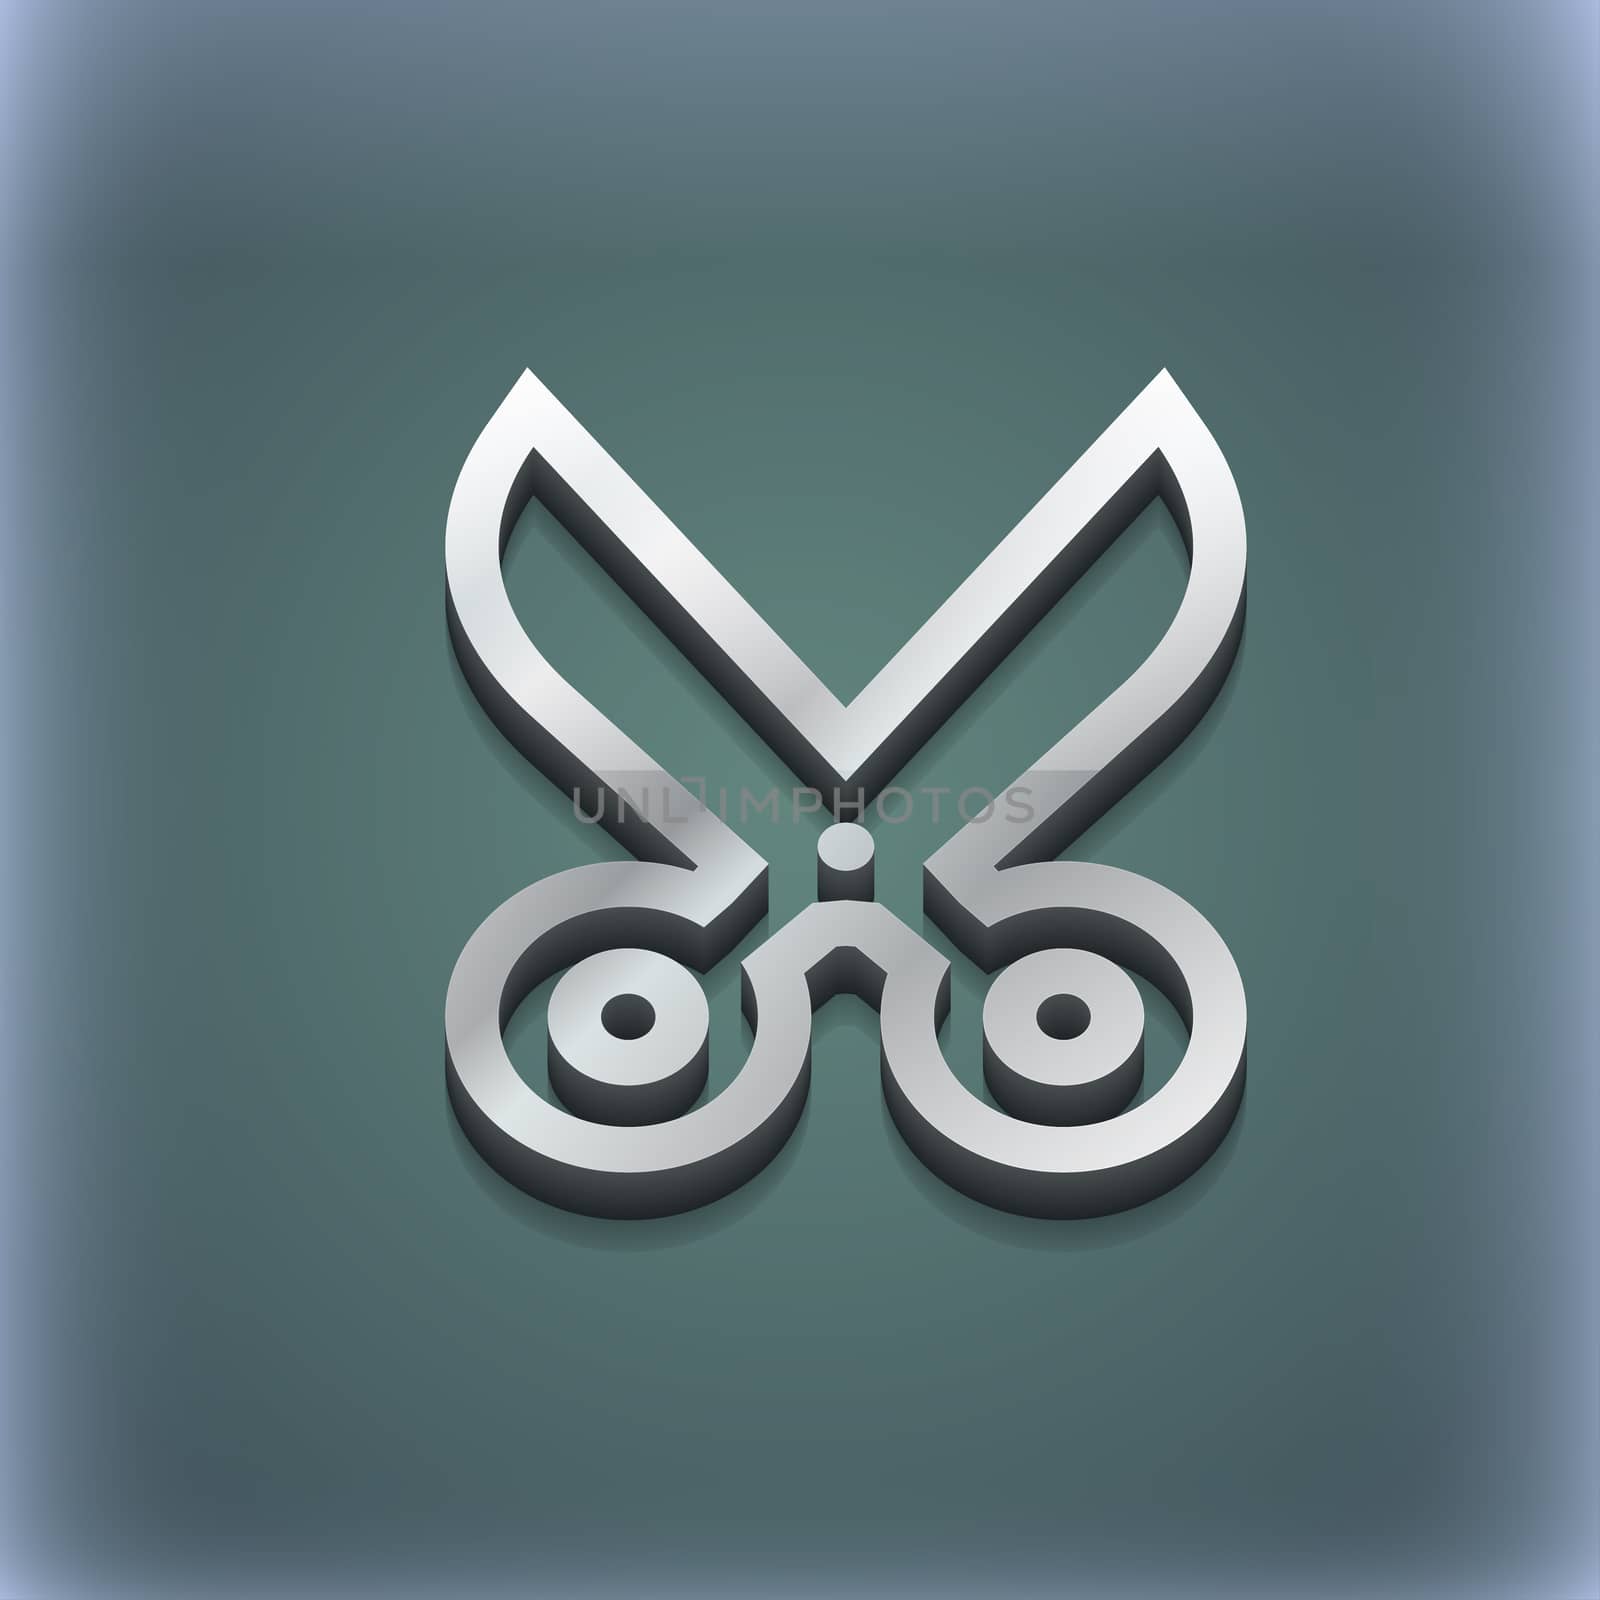 scissors icon symbol. 3D style. Trendy, modern design with space for your text illustration. Raster version